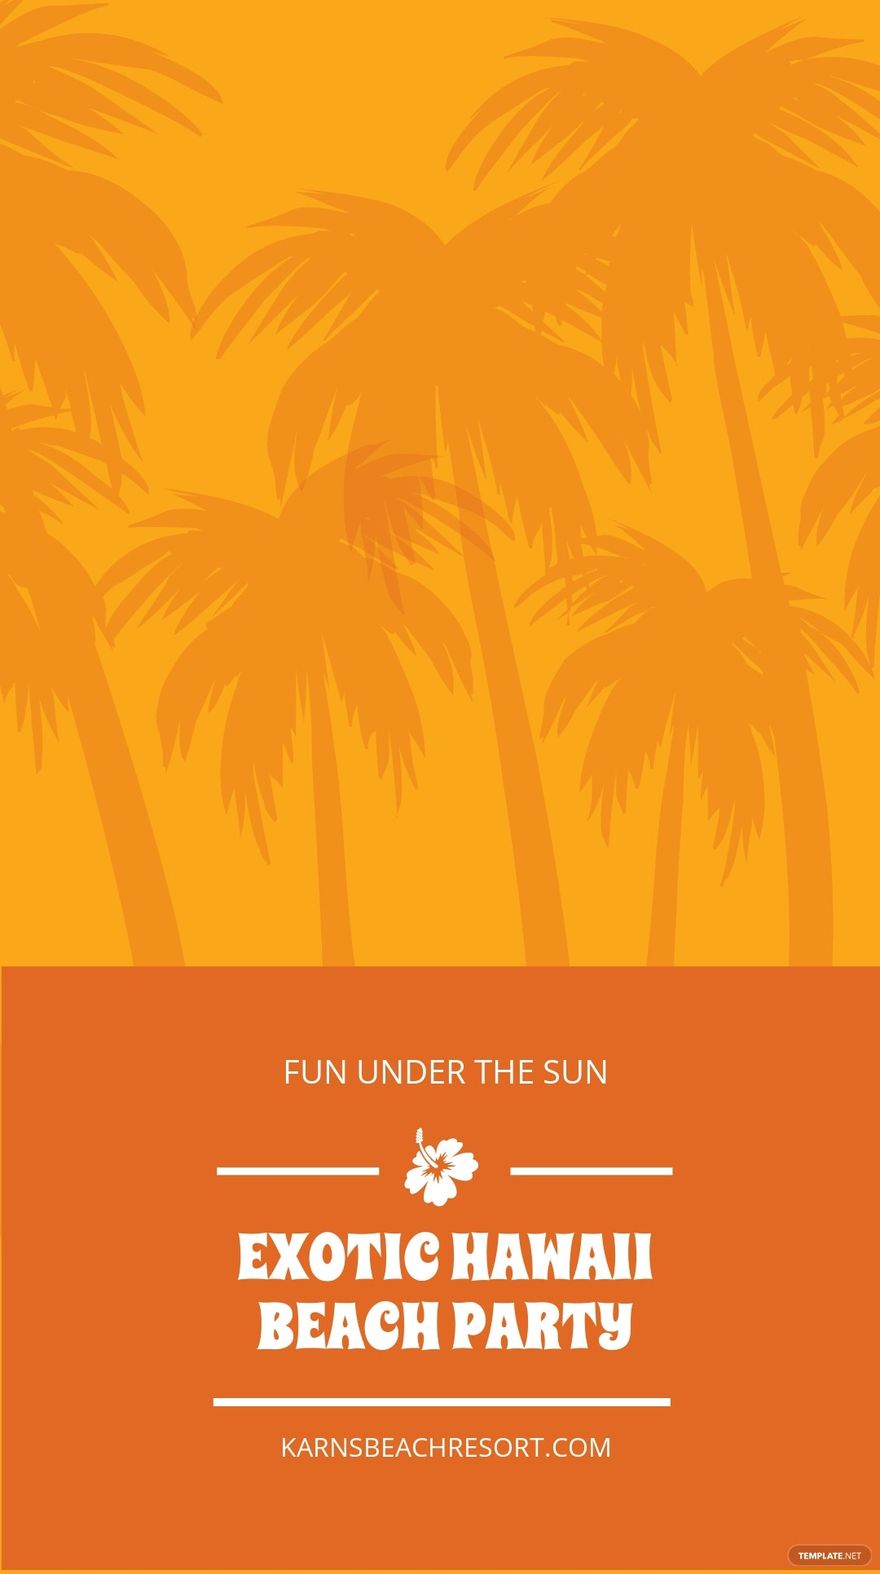 Hawaii Beach Party Snapchat Geofilter Template